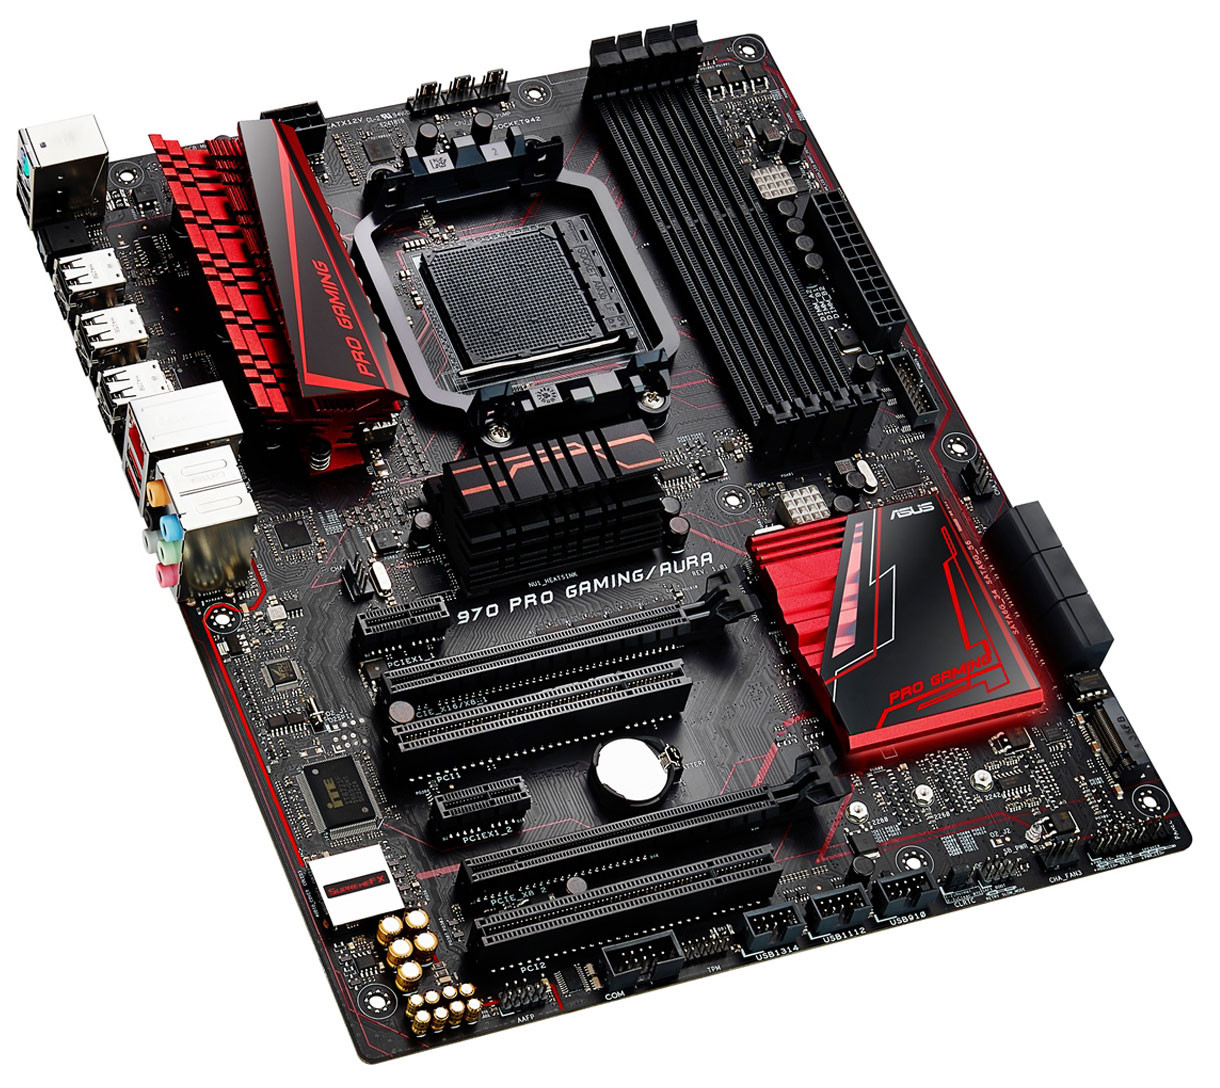 ASUS Pro Gaming Socket AM3+ | TechPowerUp